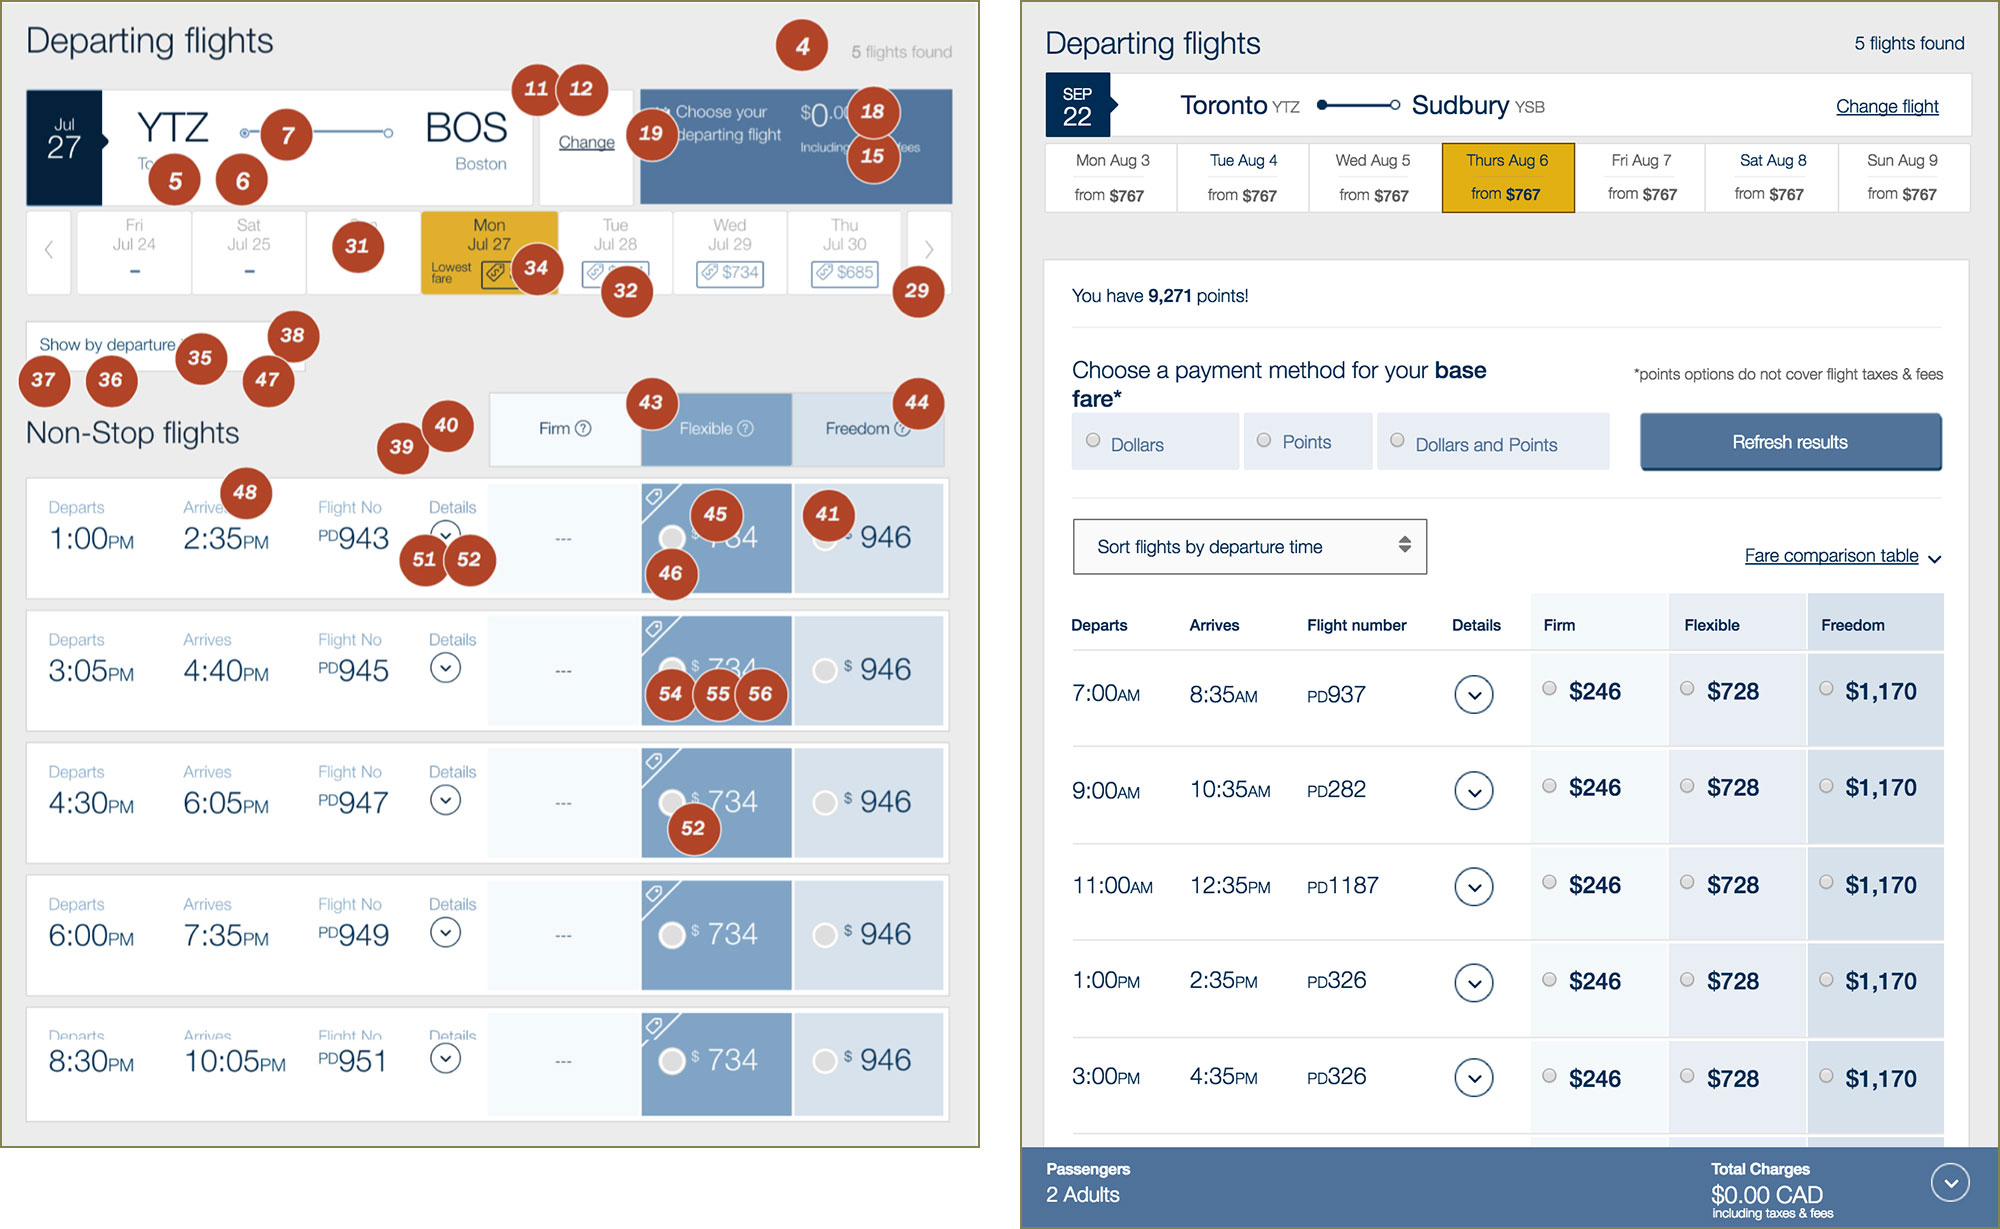 Screenshots of the airline's original flight search results page and the accessibility revisions.